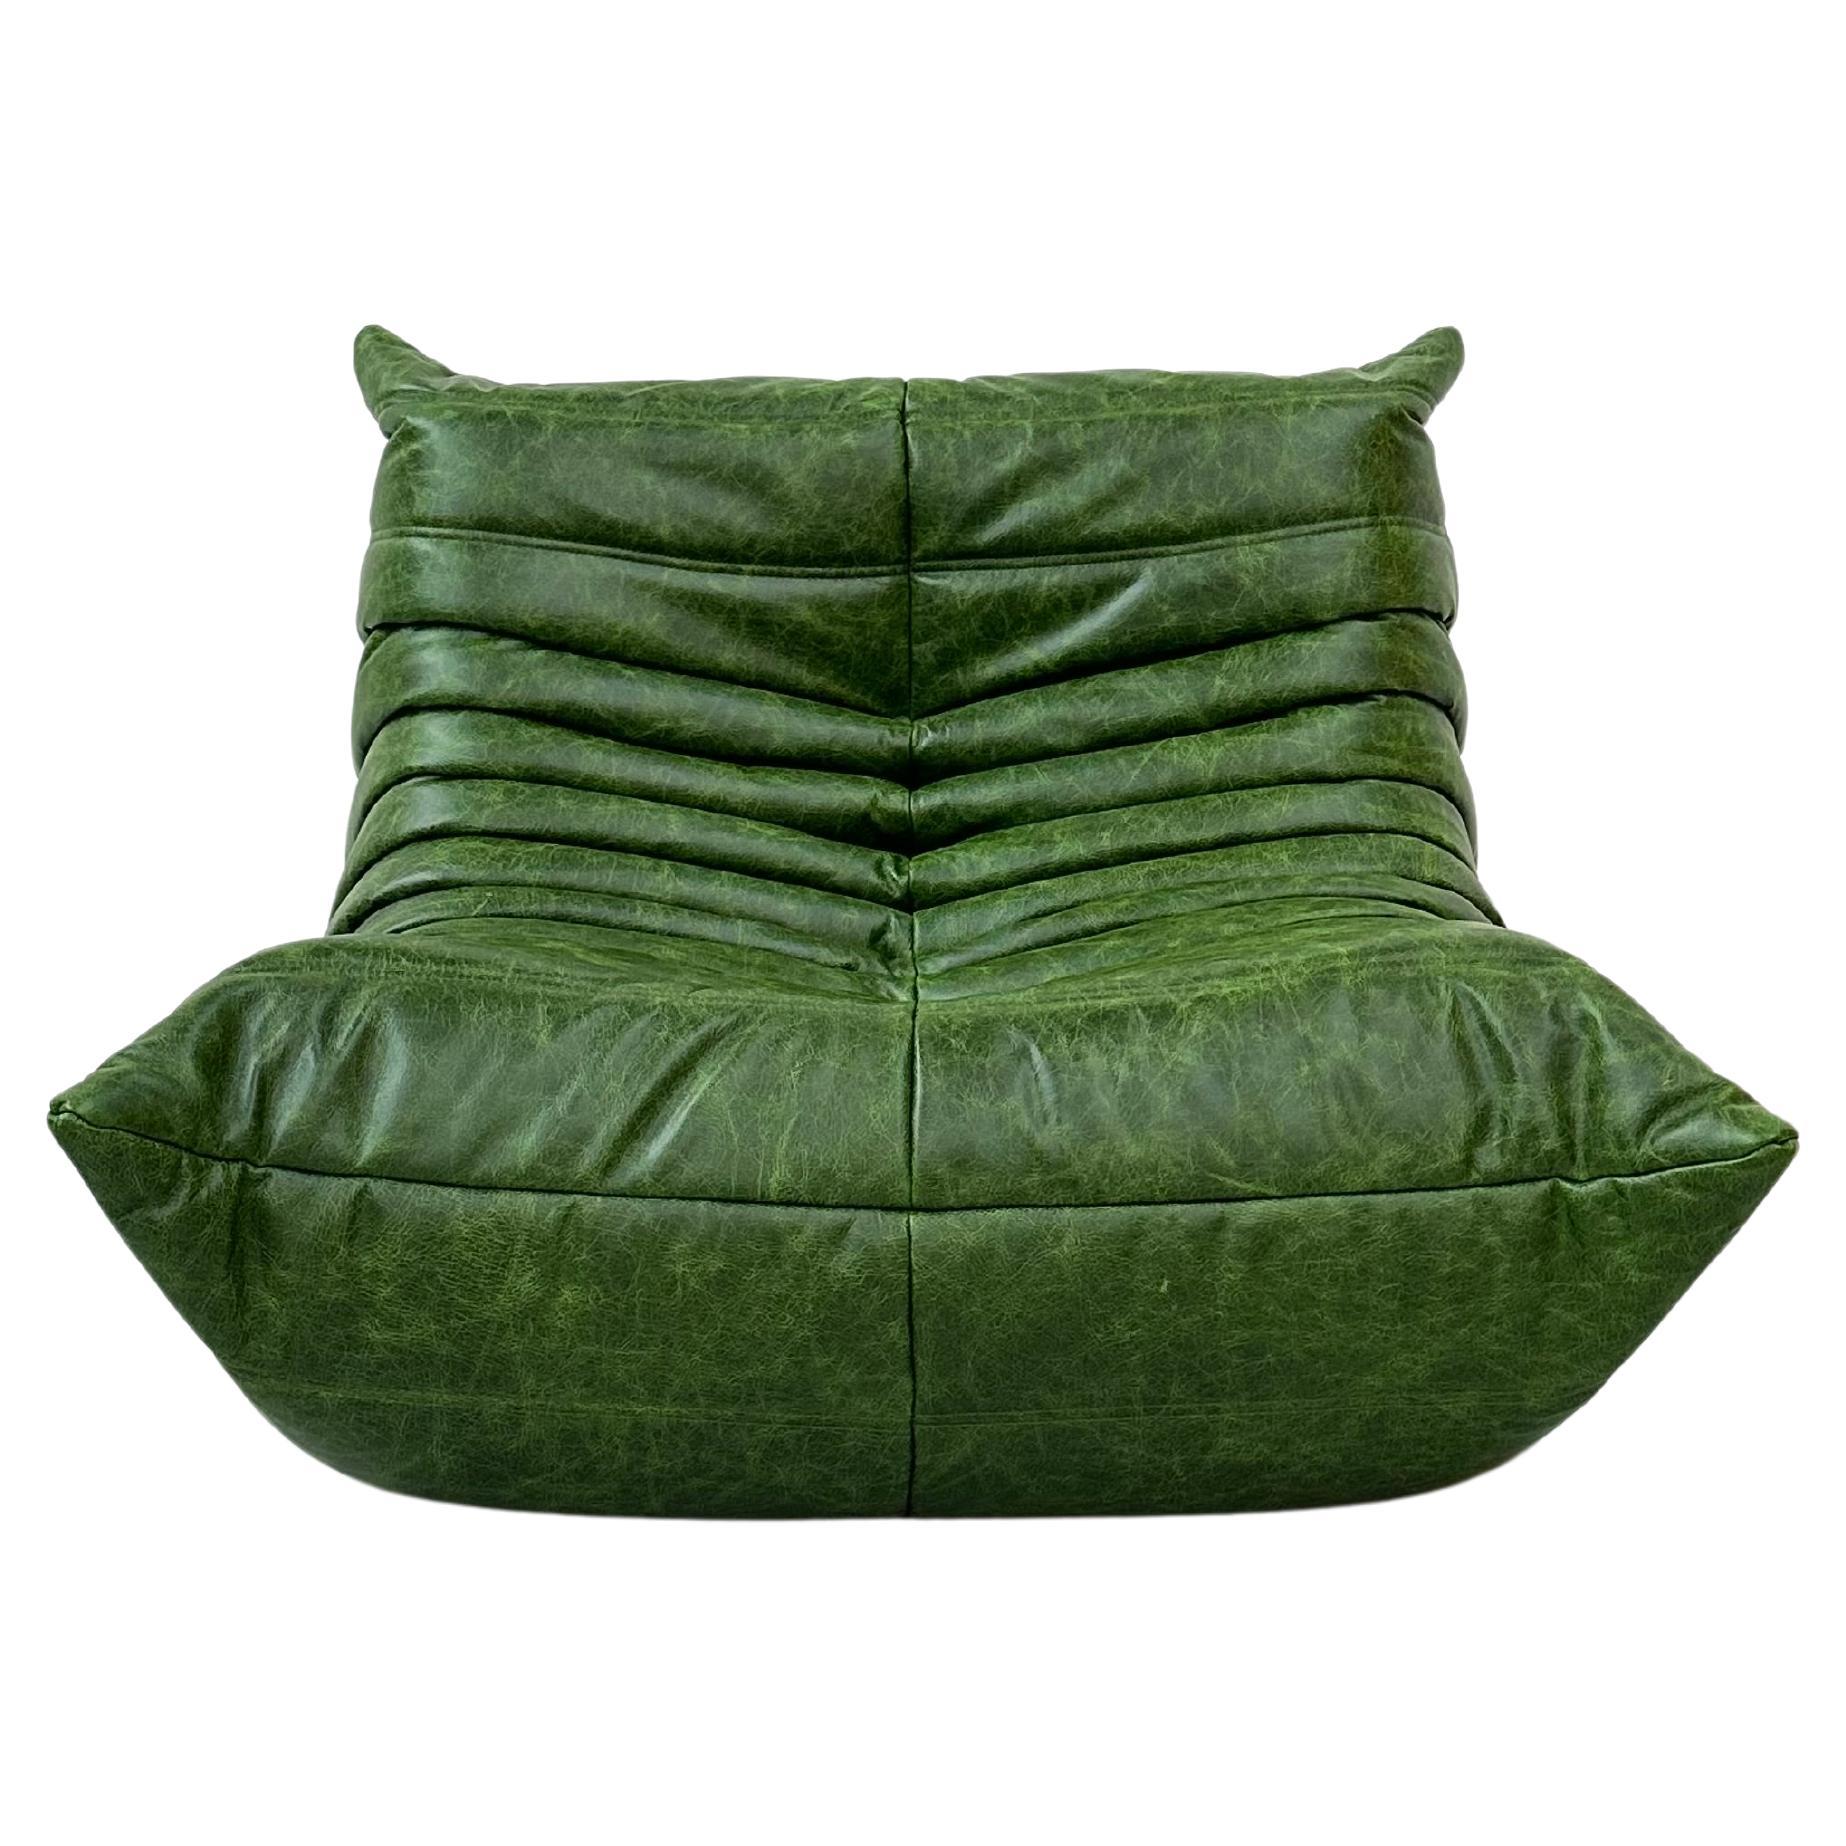 Vintage Togo Chair in Forest Green Leather by Michel Ducaroy for Ligne Roset.